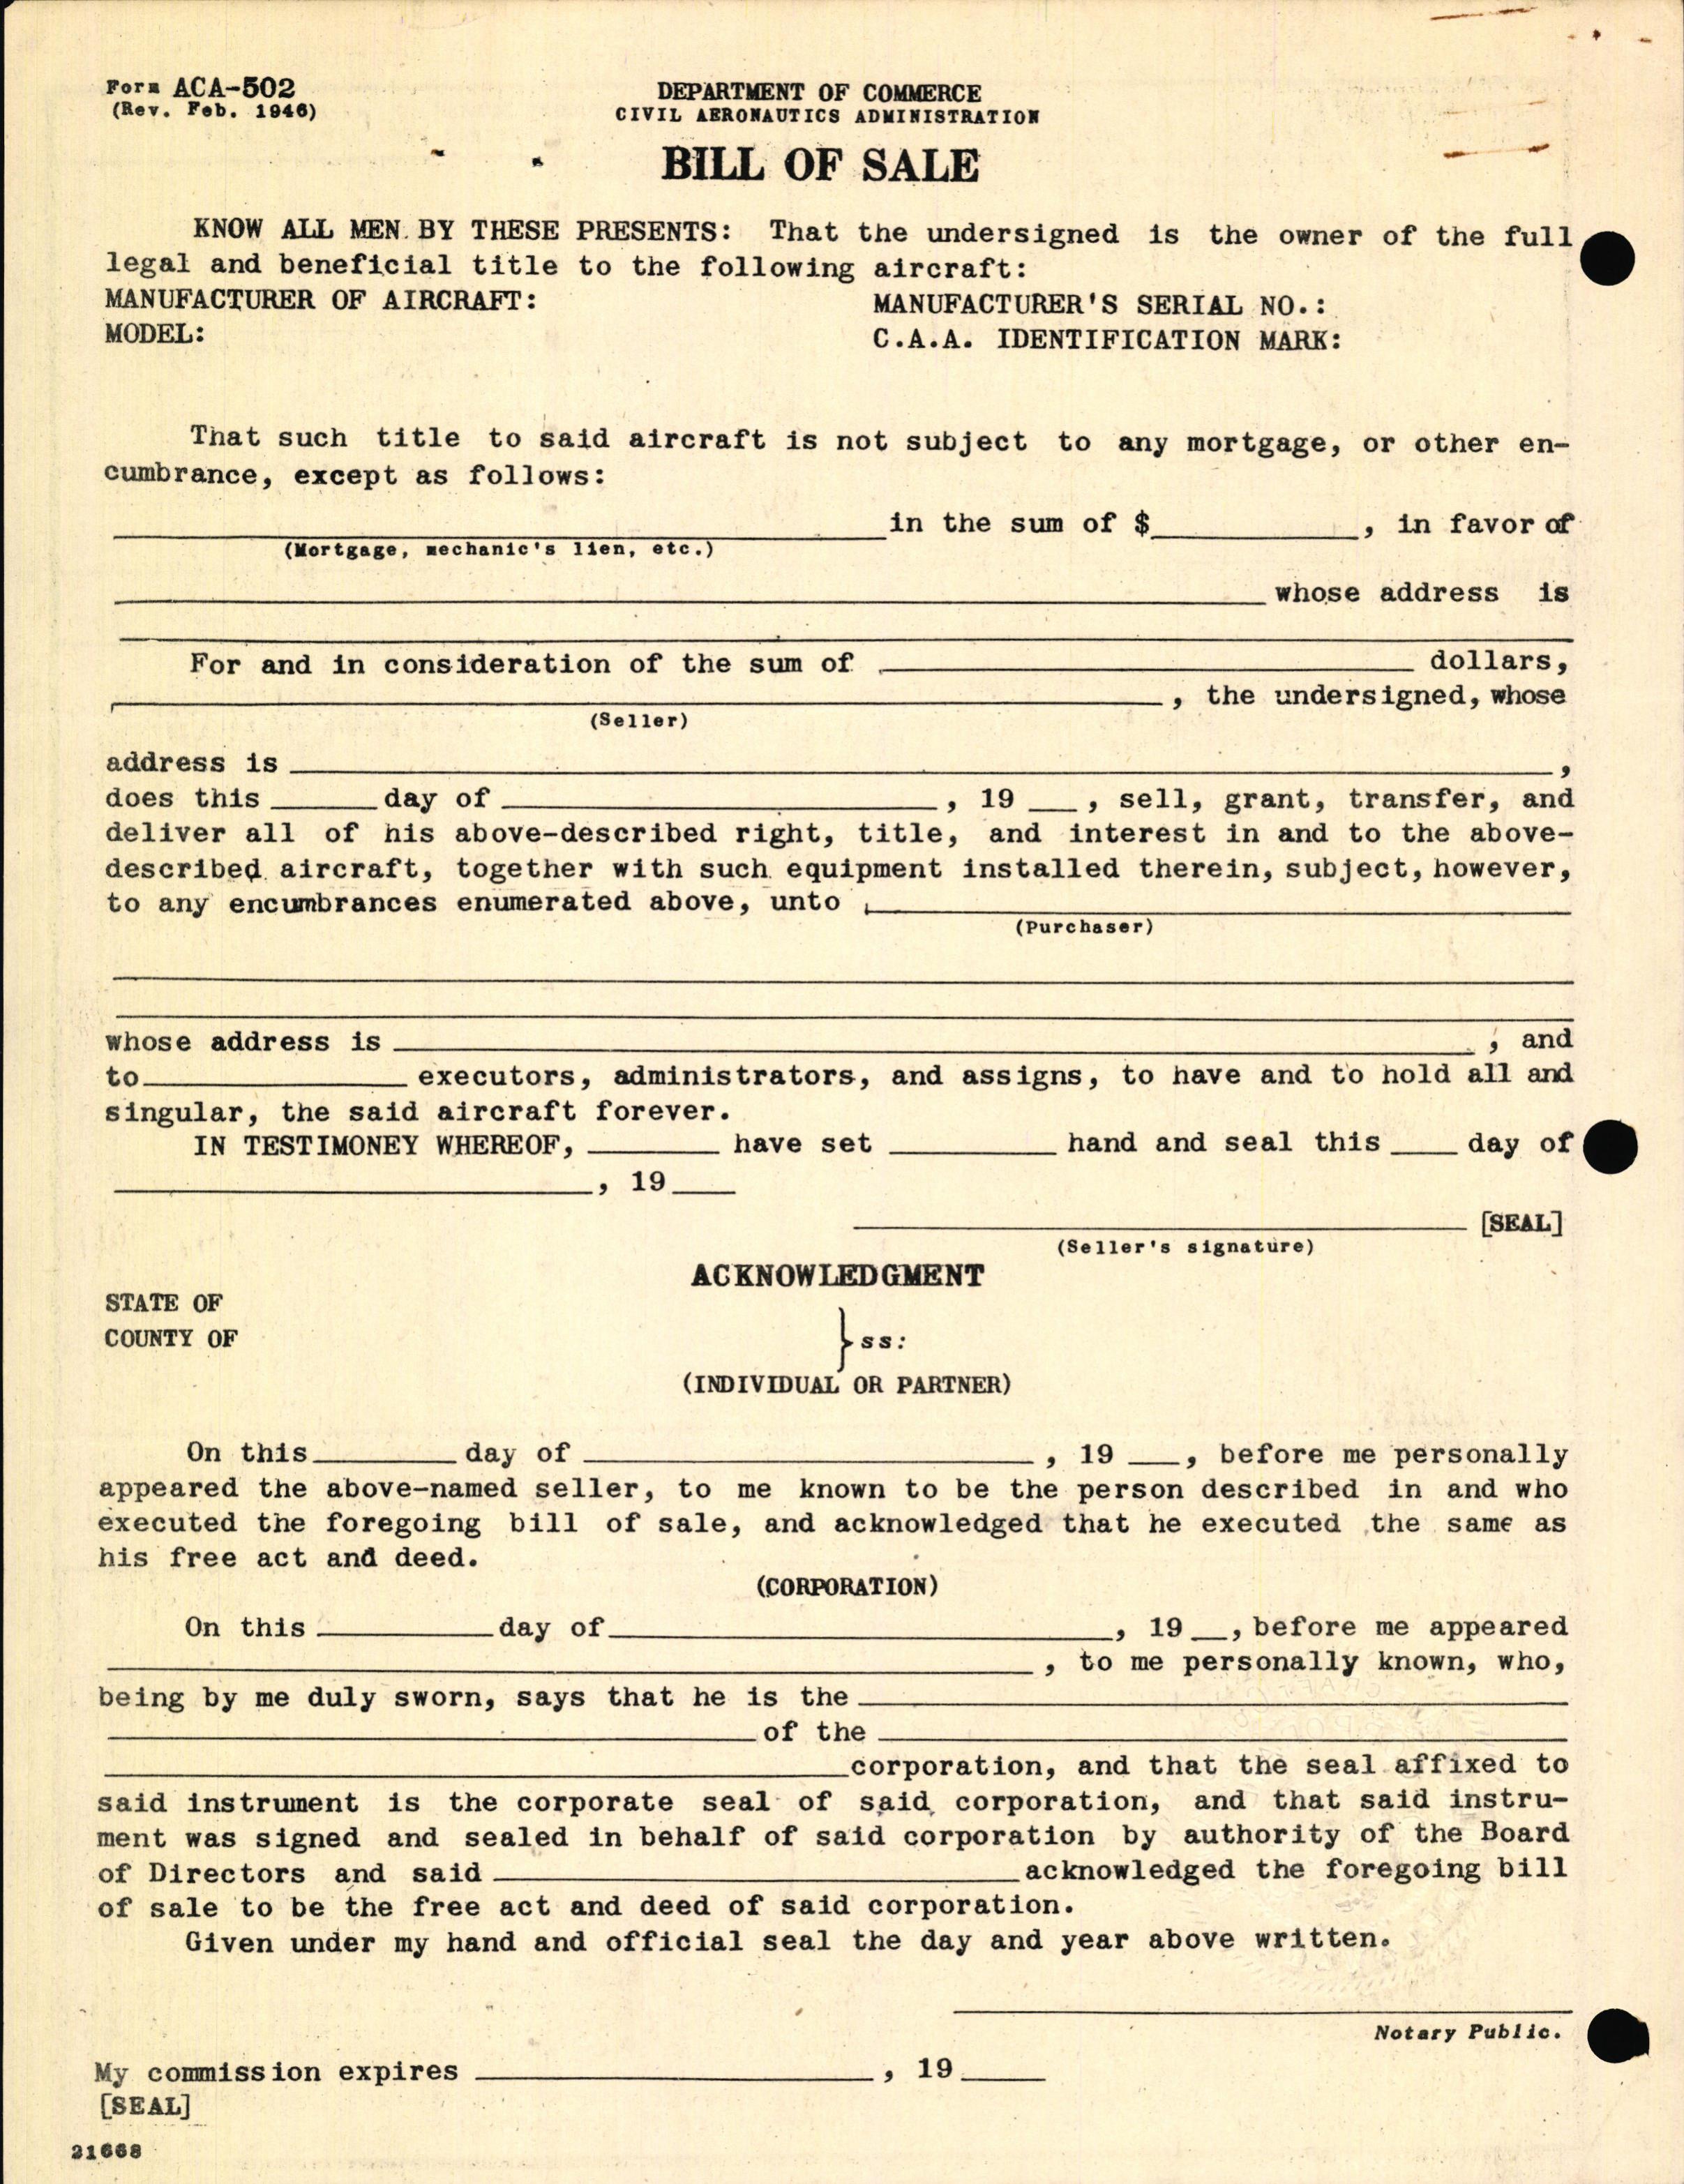 Sample page 2 from AirCorps Library document: Technical Information for Serial Number 2121